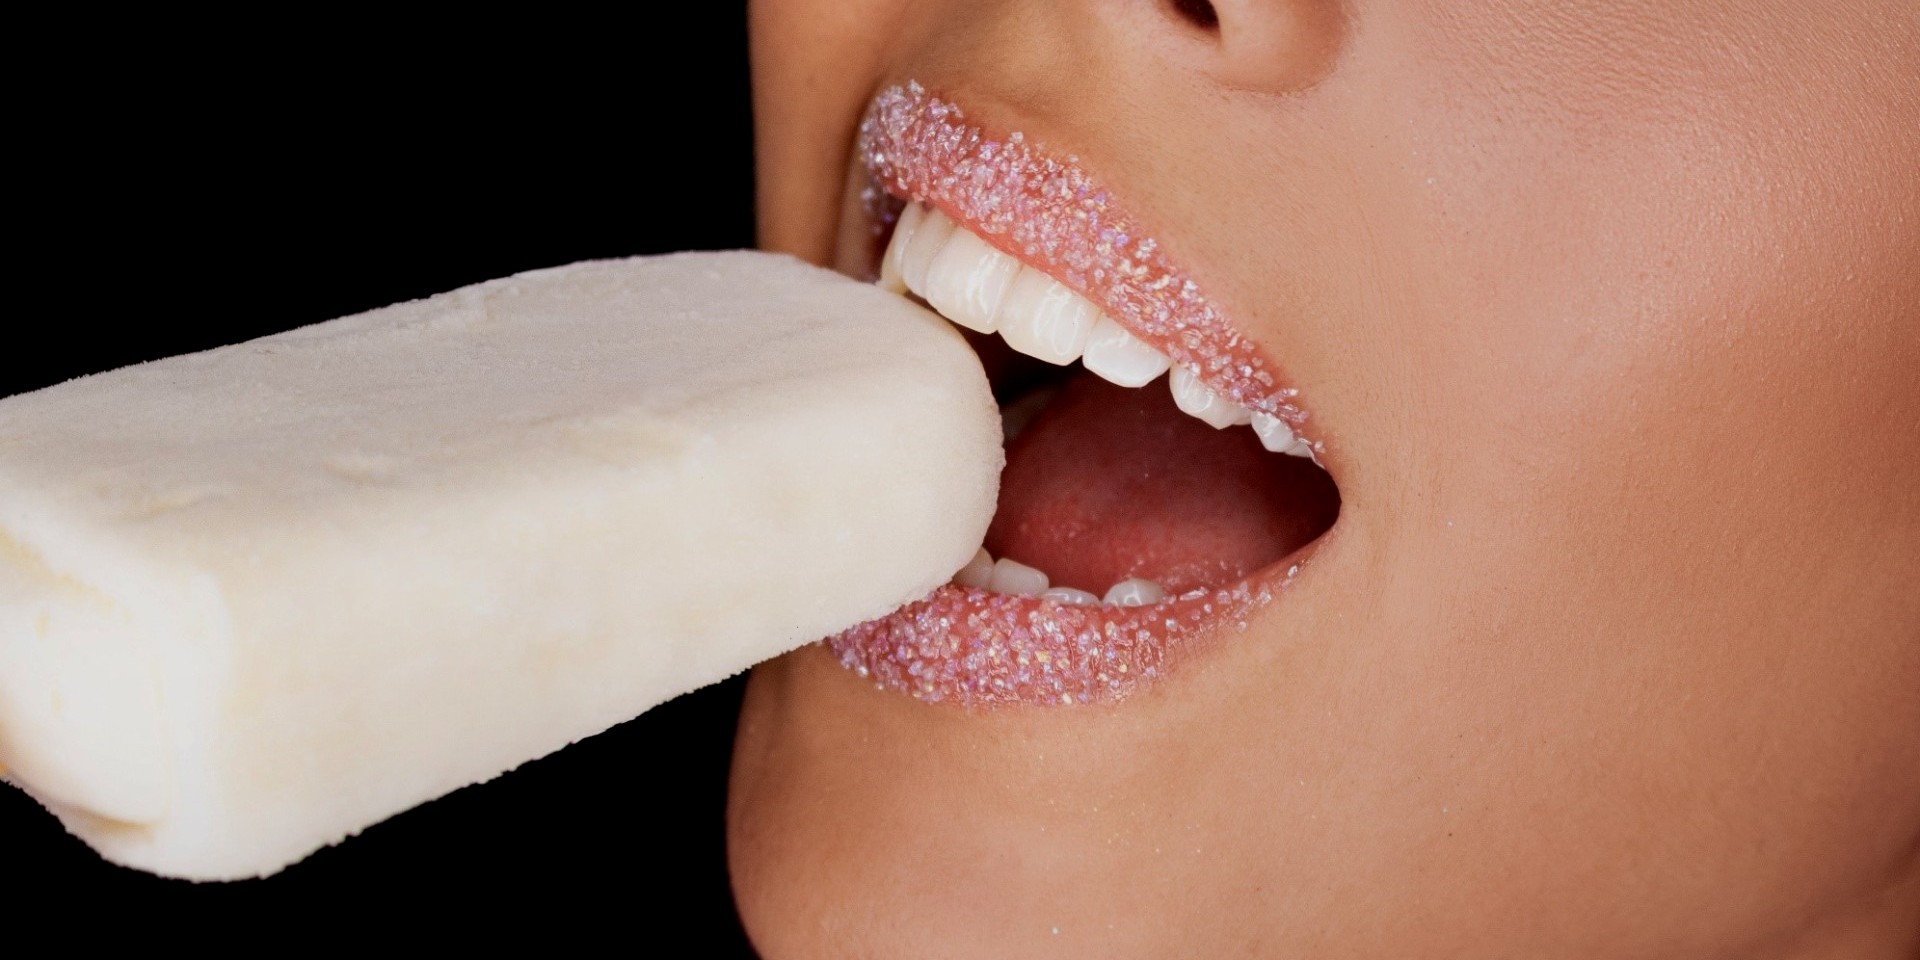 How Does Sugar Affect Skin And Beauty?